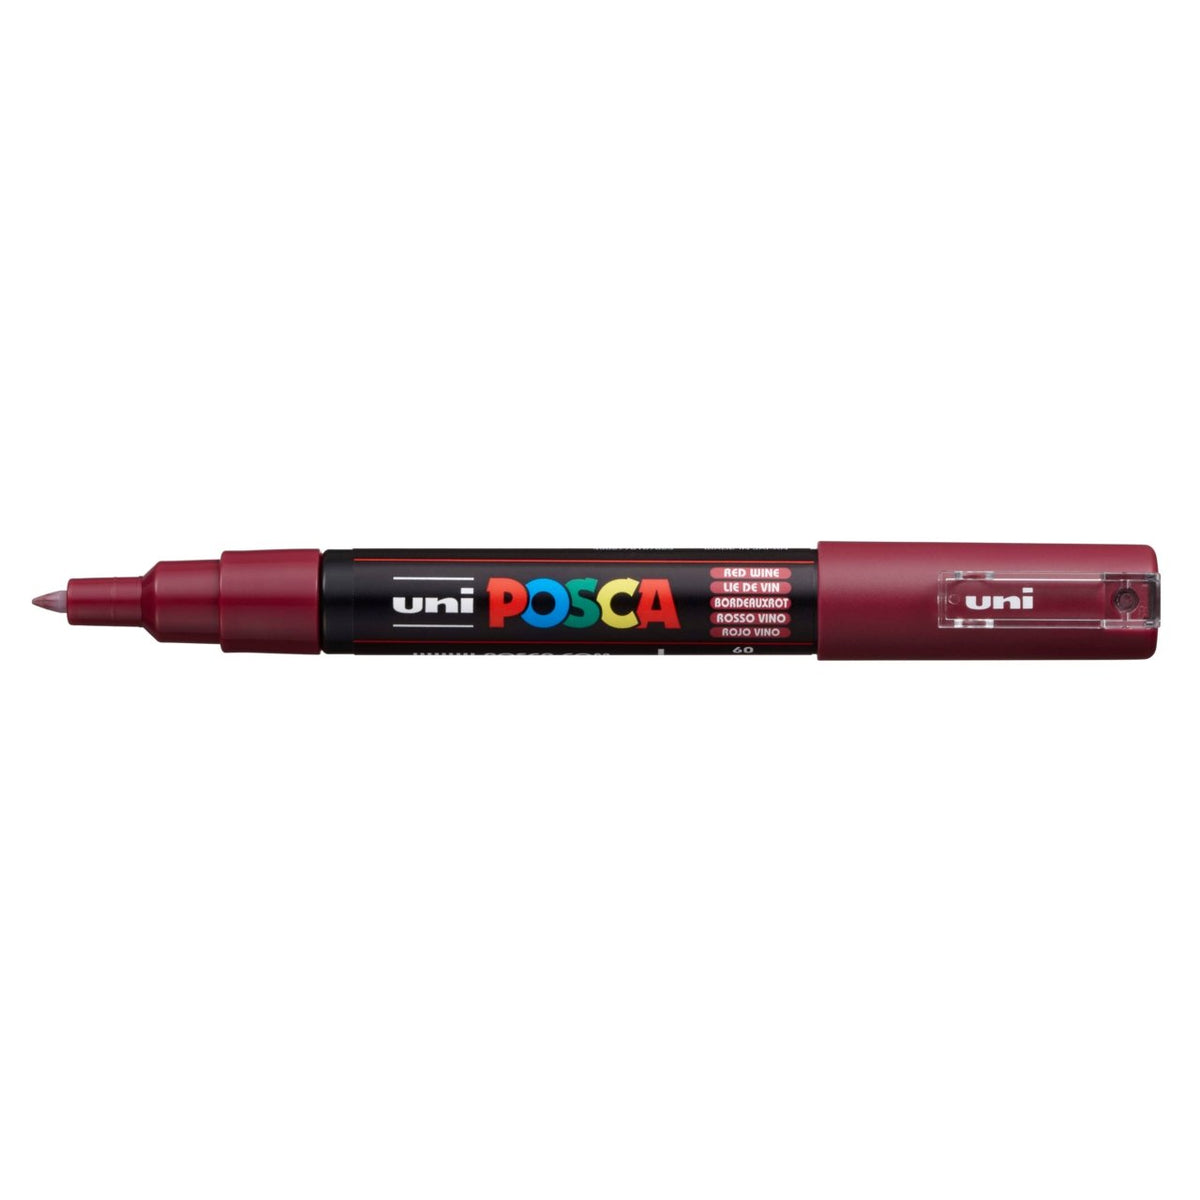 uni POSCA Paint Marker PC-1M Extra Fine Tapered Bullet Tip - Red Wine - merriartist.com